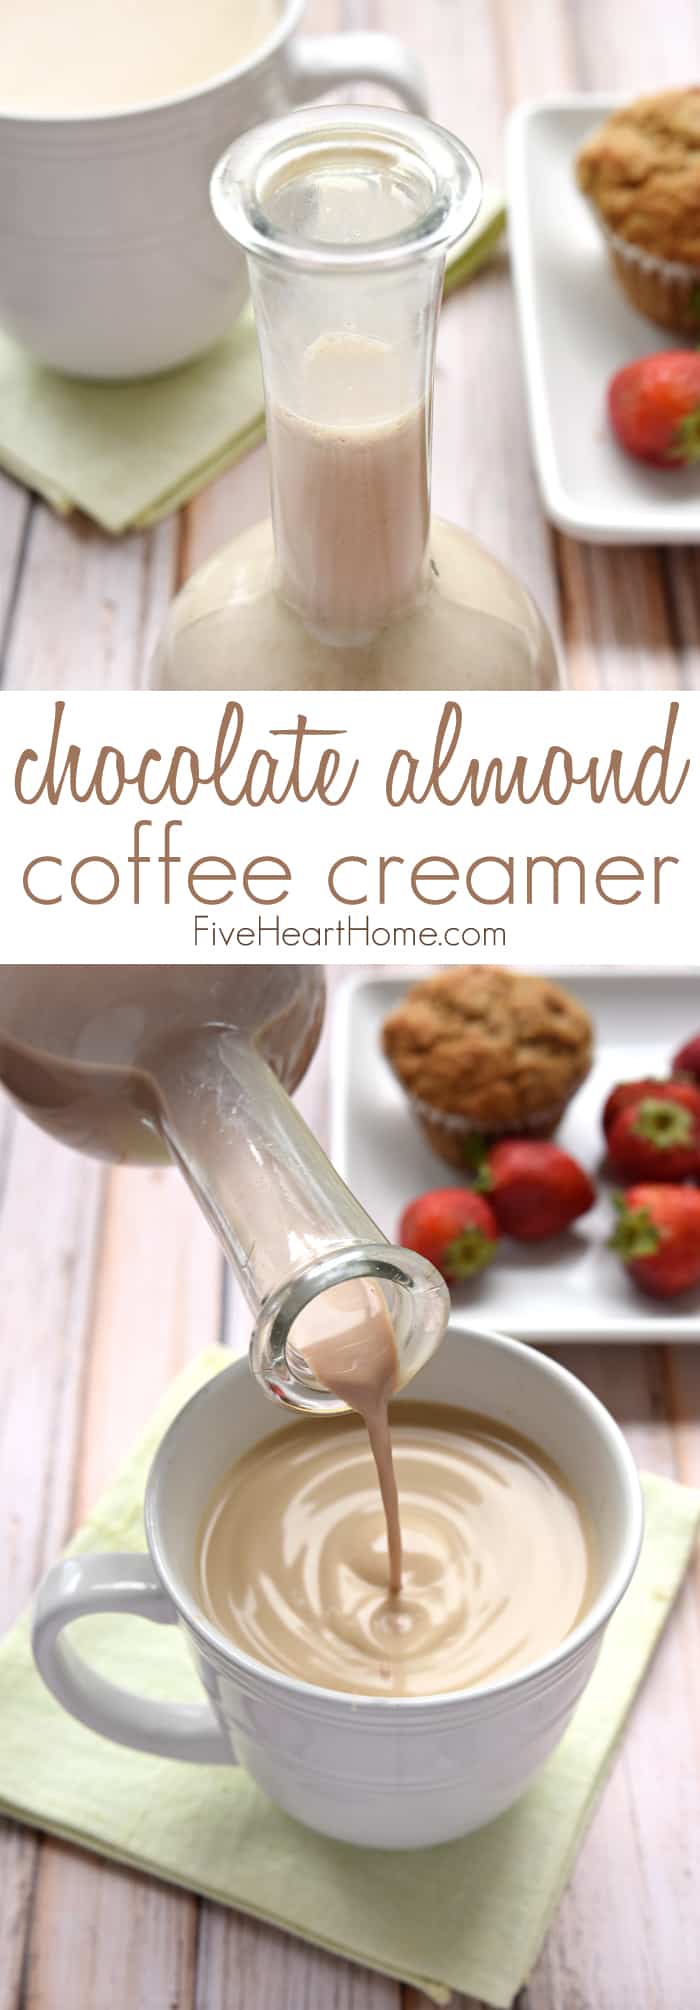 Homemade Chocolate Almond Coffee Creamer ~ this all-natural creamer is sweetened with pure maple syrup and flavored with cocoa powder, almond extract, and vanilla extract for a decadent, delicious way to dress up your morning cup 'o joe! | FiveHeartHome.com via @fivehearthome